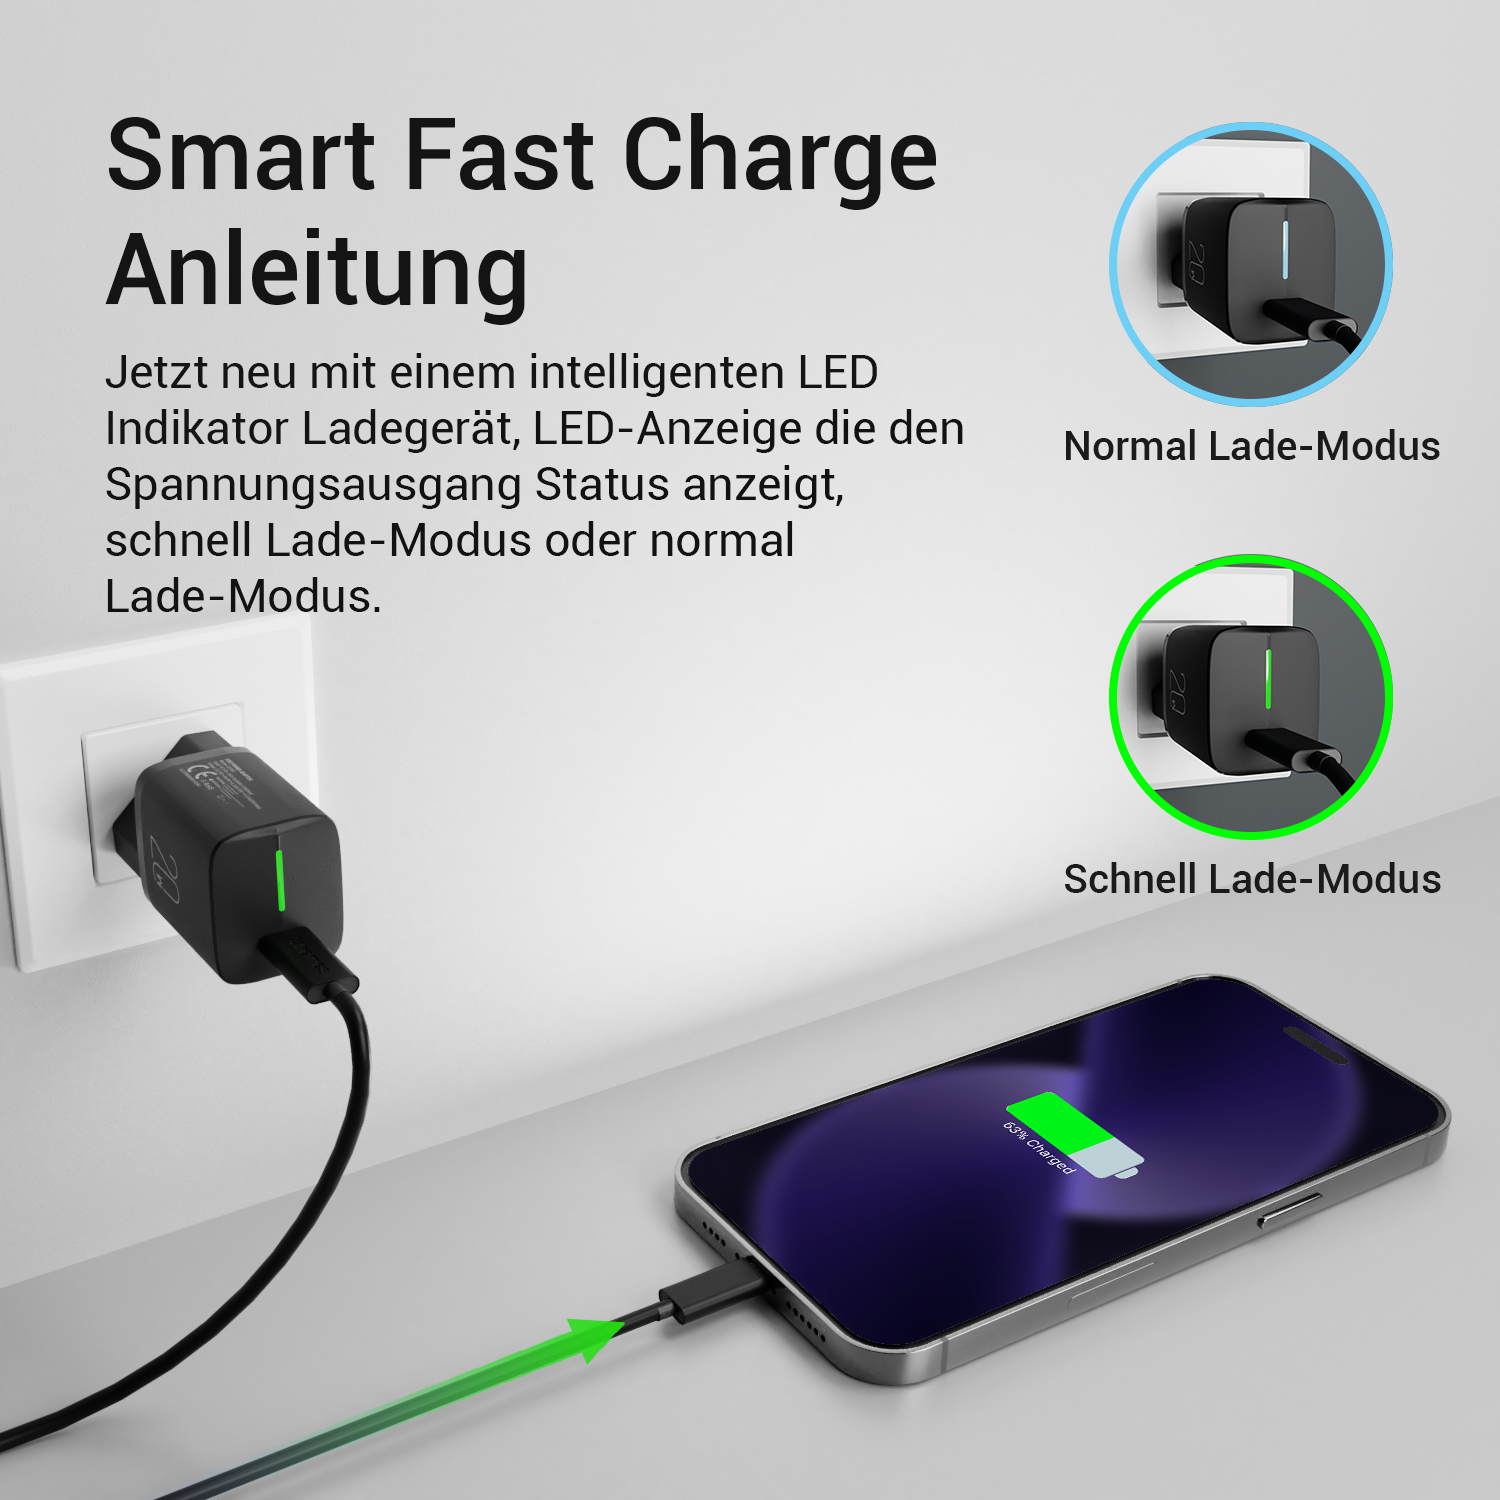 Tablets, 3.0 PD Charger (GC08) Samsung, White Xiaomi, XTREMES Handys, iPhone, 20W Redmi, Ladegerät-Adapter Fast Smartwatches, (ohne Apple, Kabel)